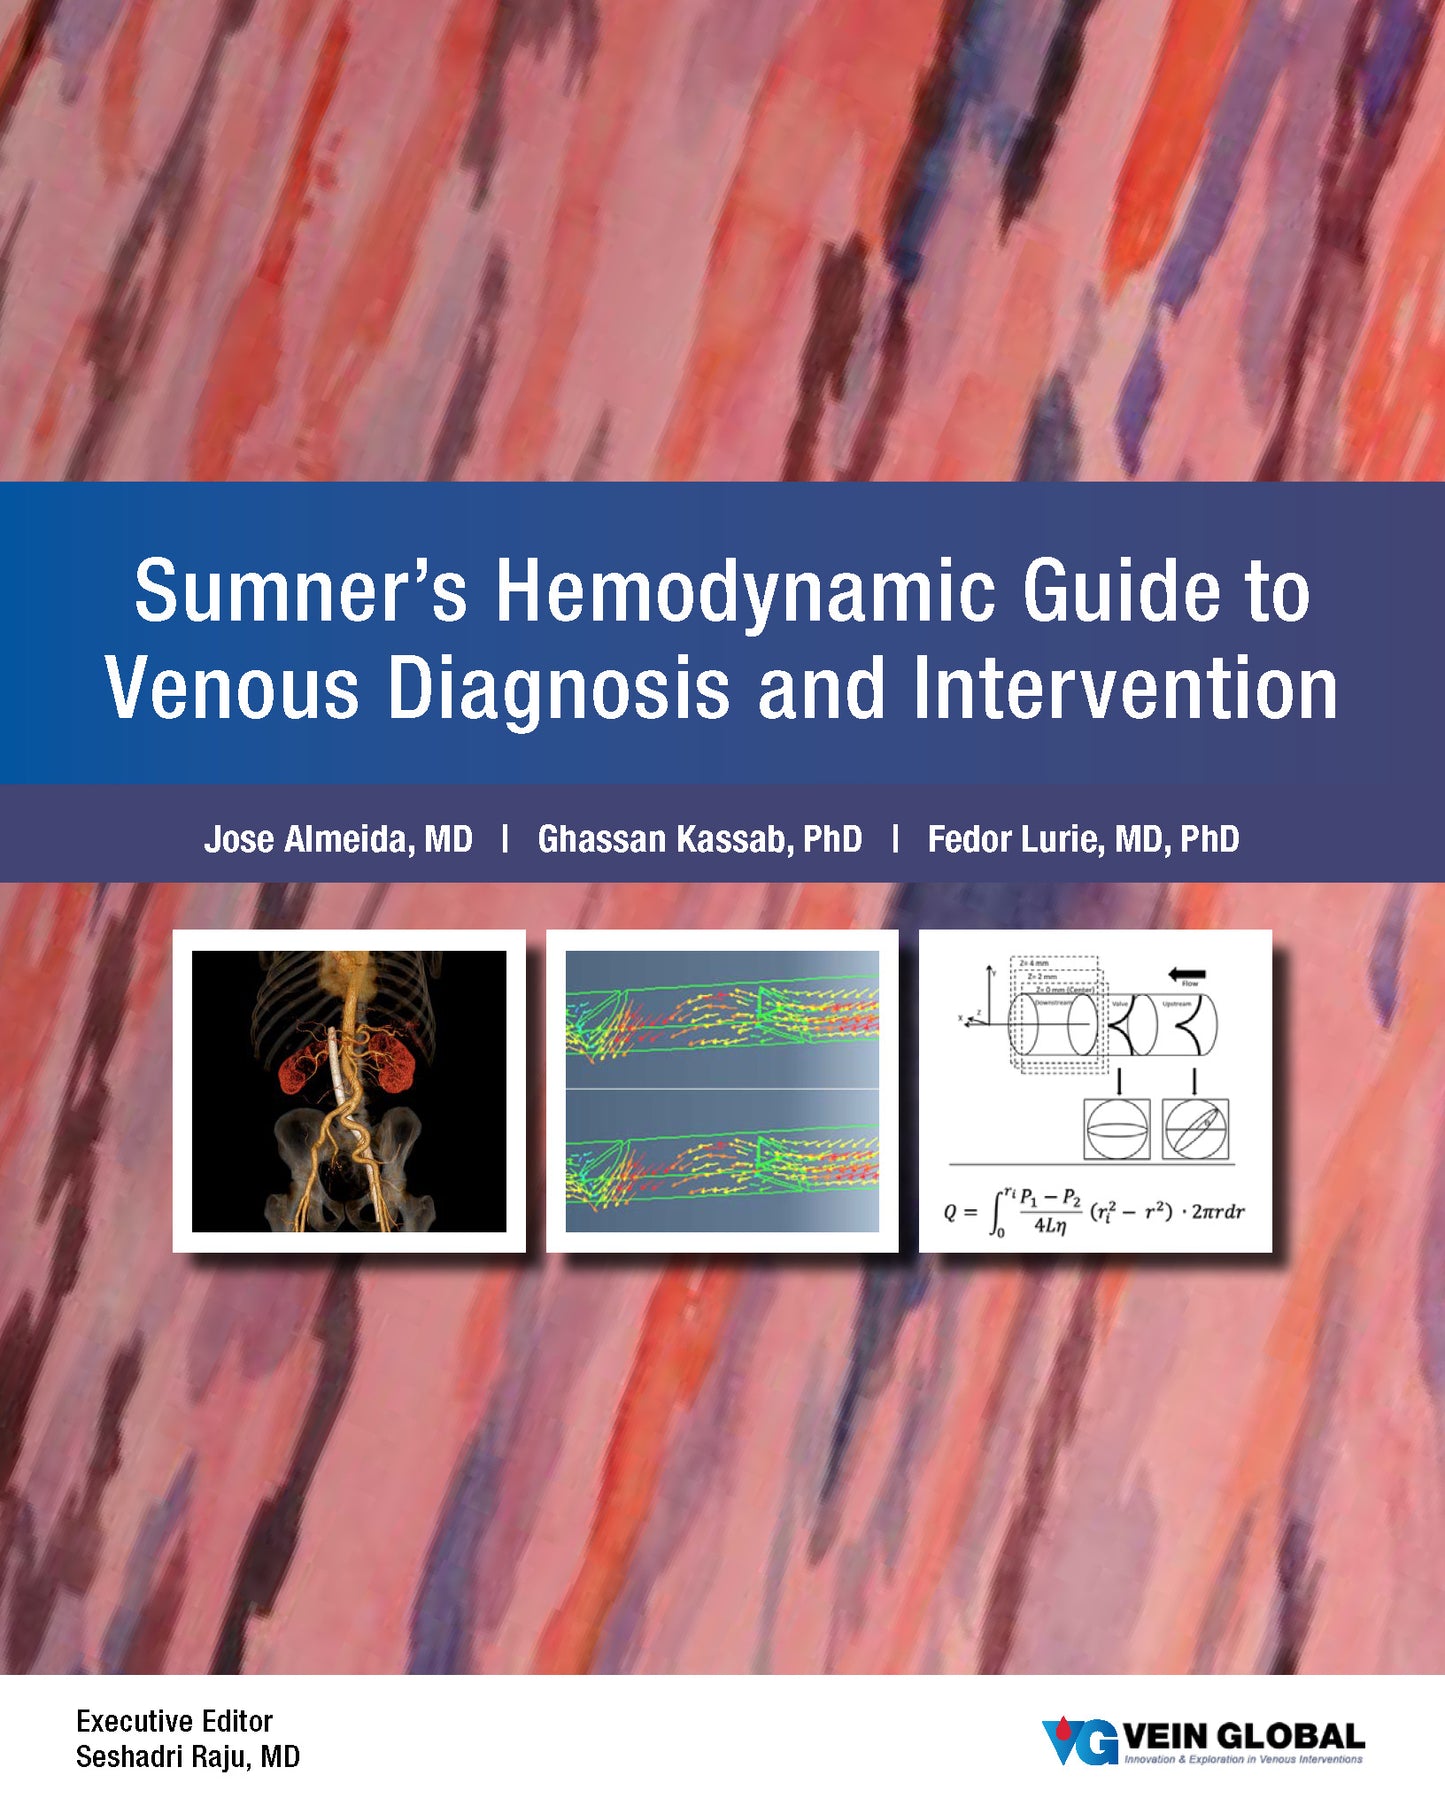 Sumner's Hemodynamic Guide to Venous Diagnosis and Intervention